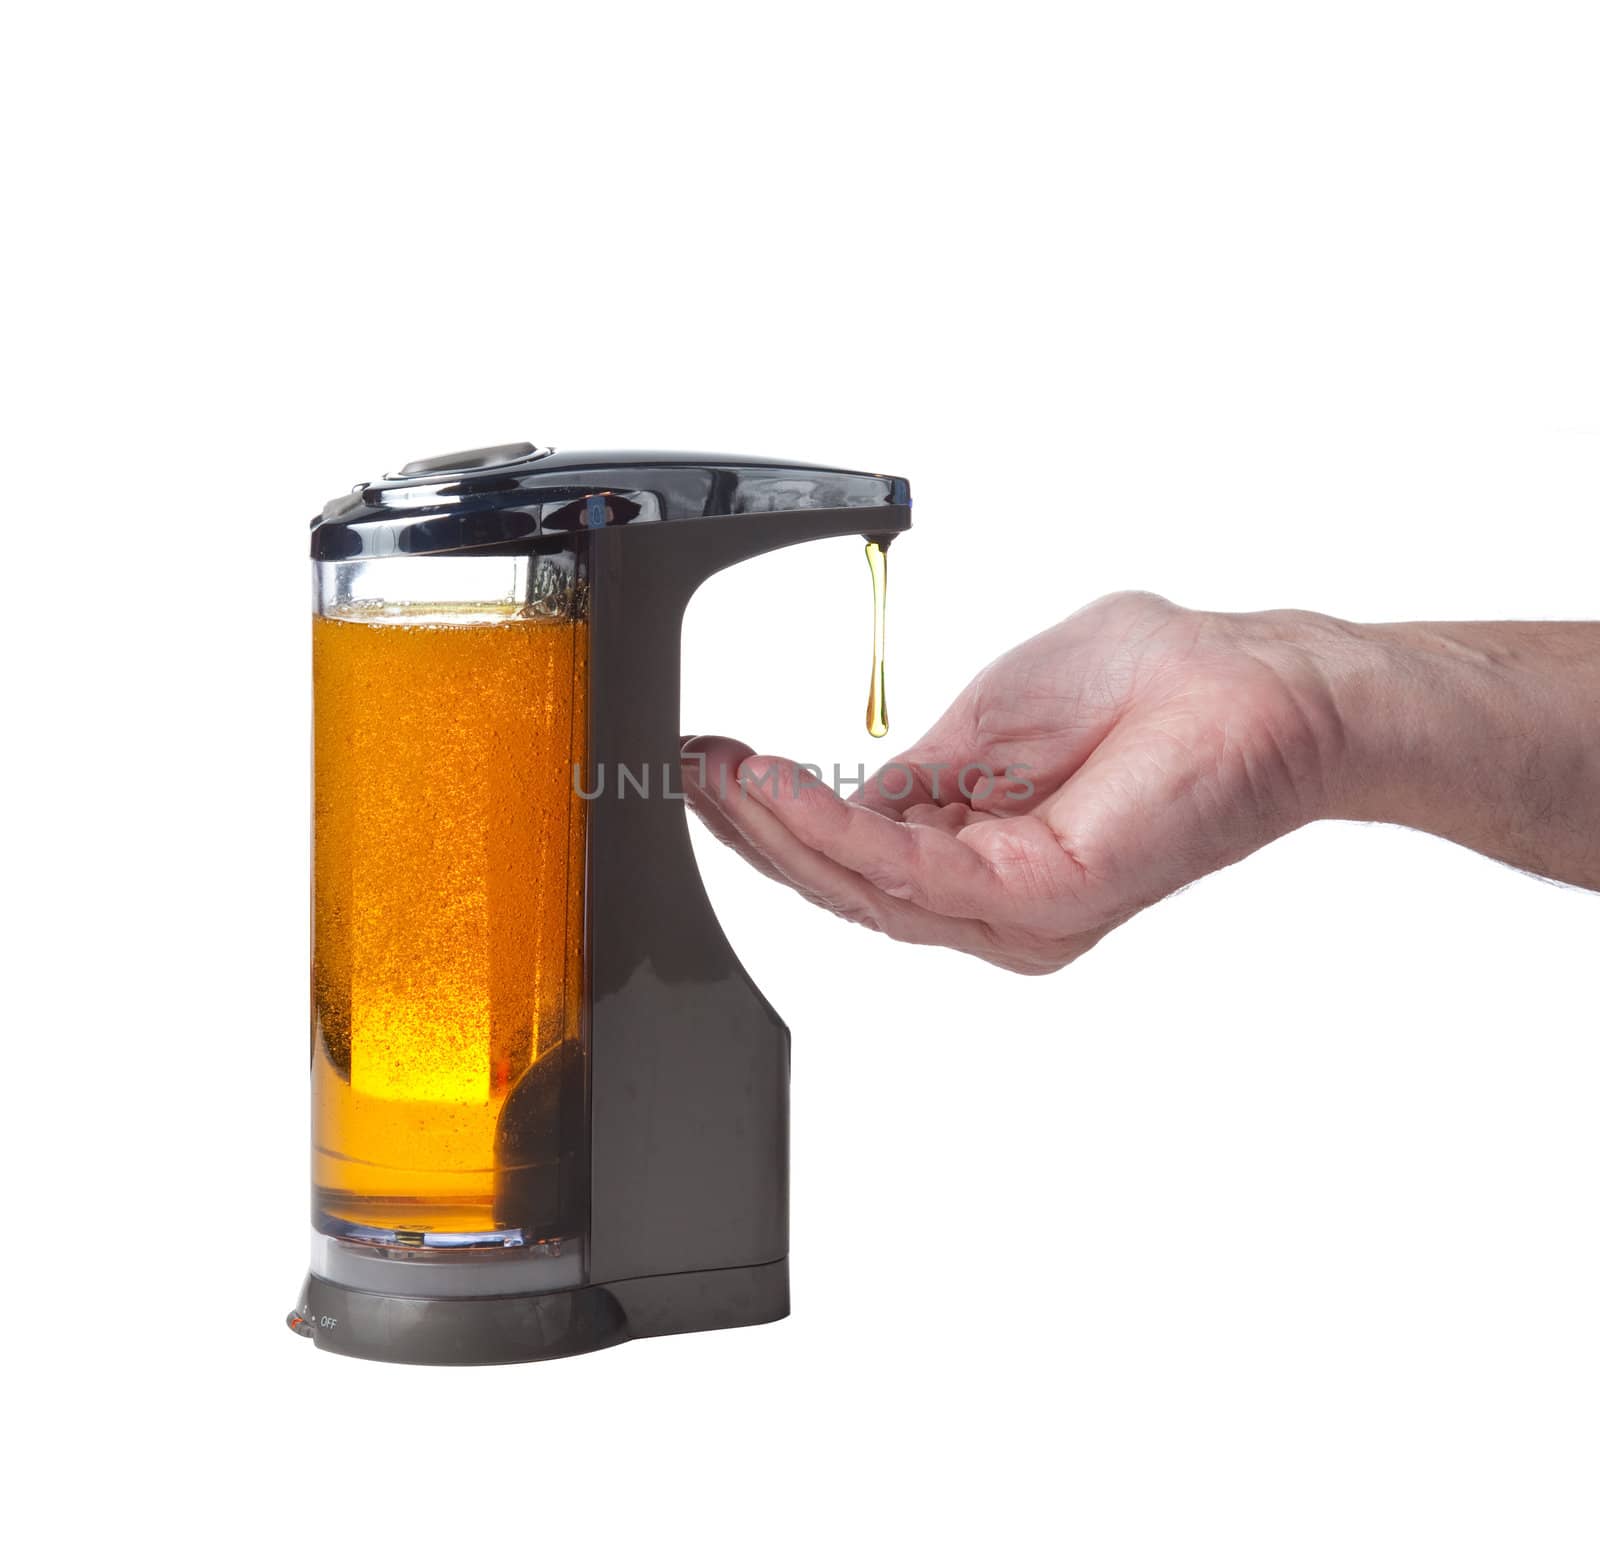 Soap being dispensed into hand by steheap